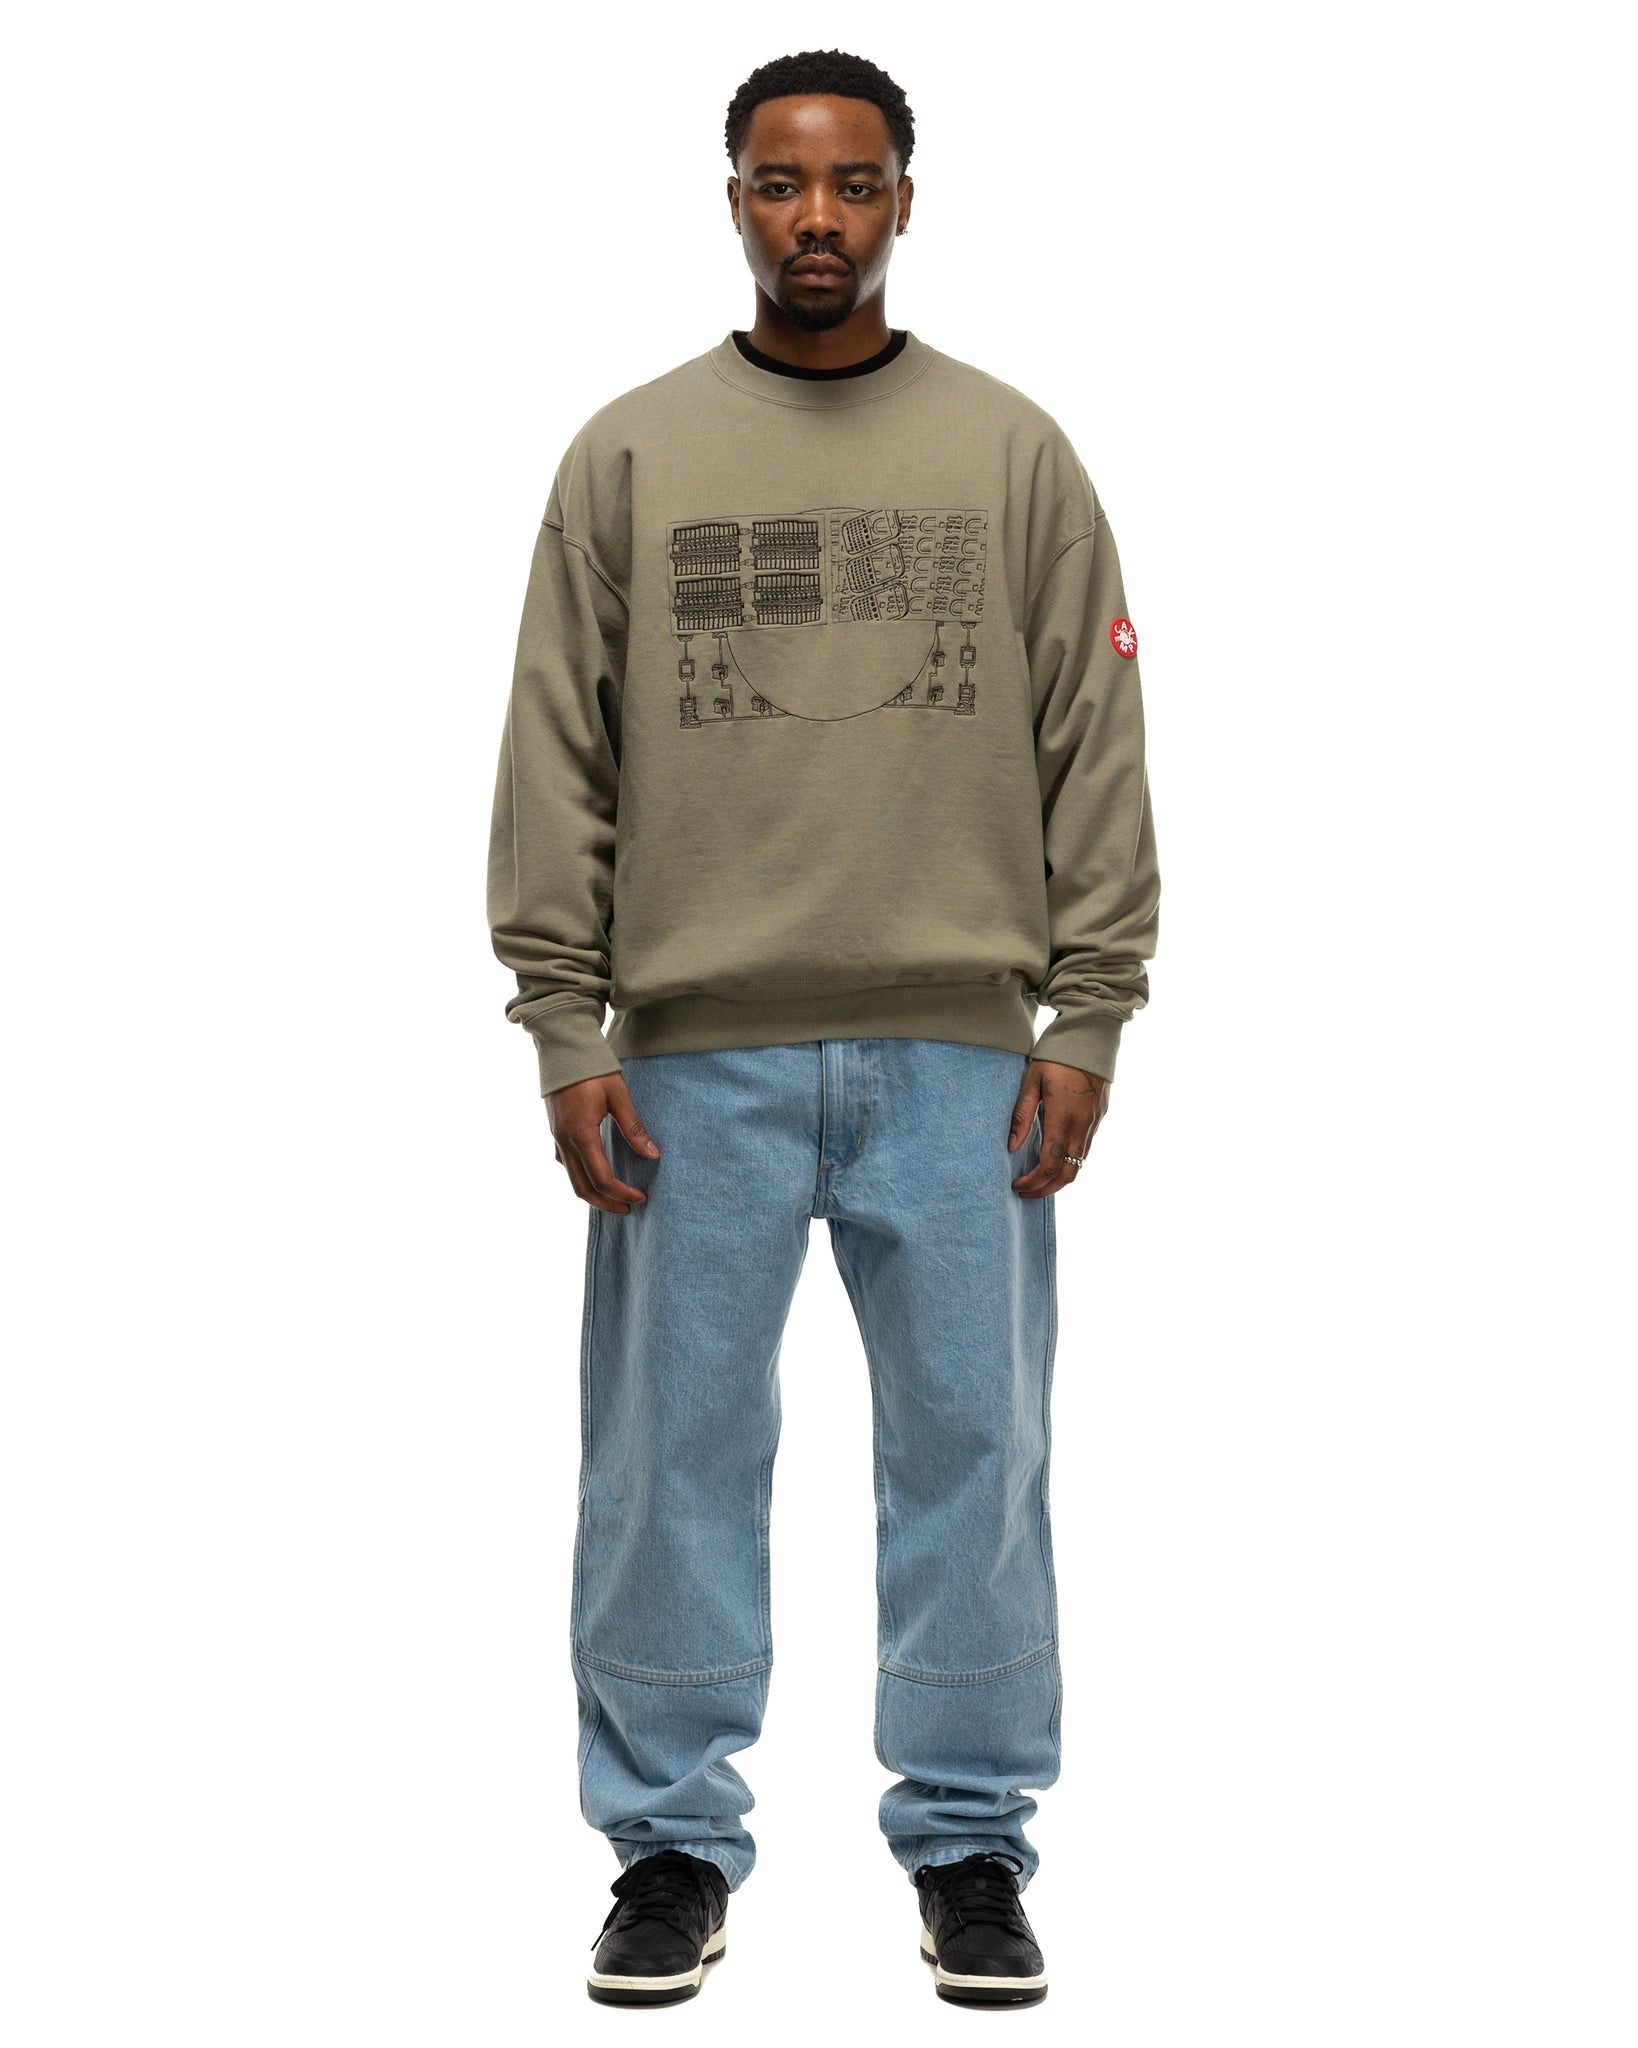 NOT IDENTICAL TO CREWNECK OLIVE - 2